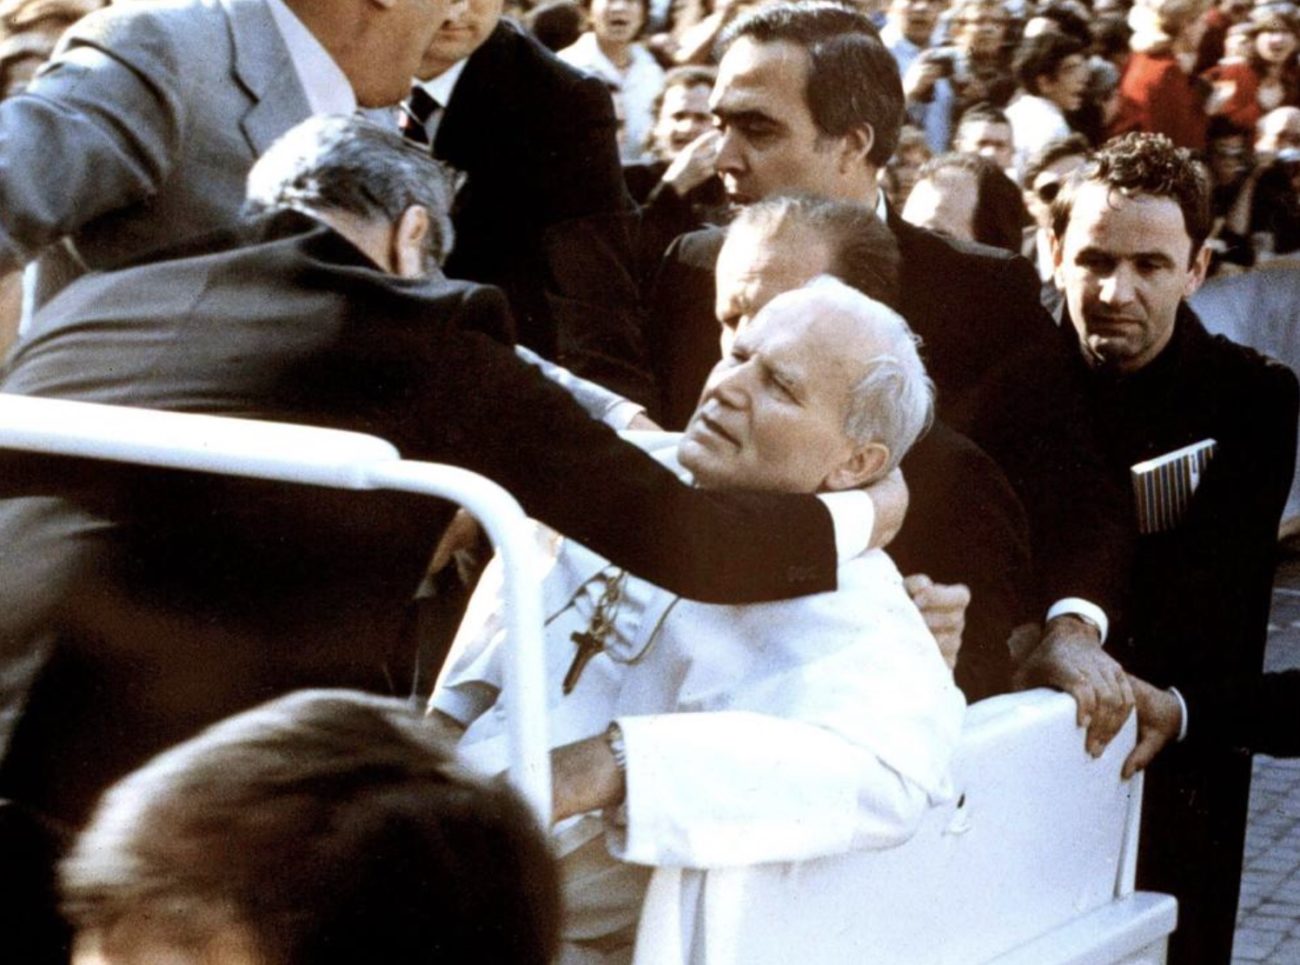 May 13, 1981, attack against Pope John Paul II in Piazza San Pietro in Rome. RCS photo